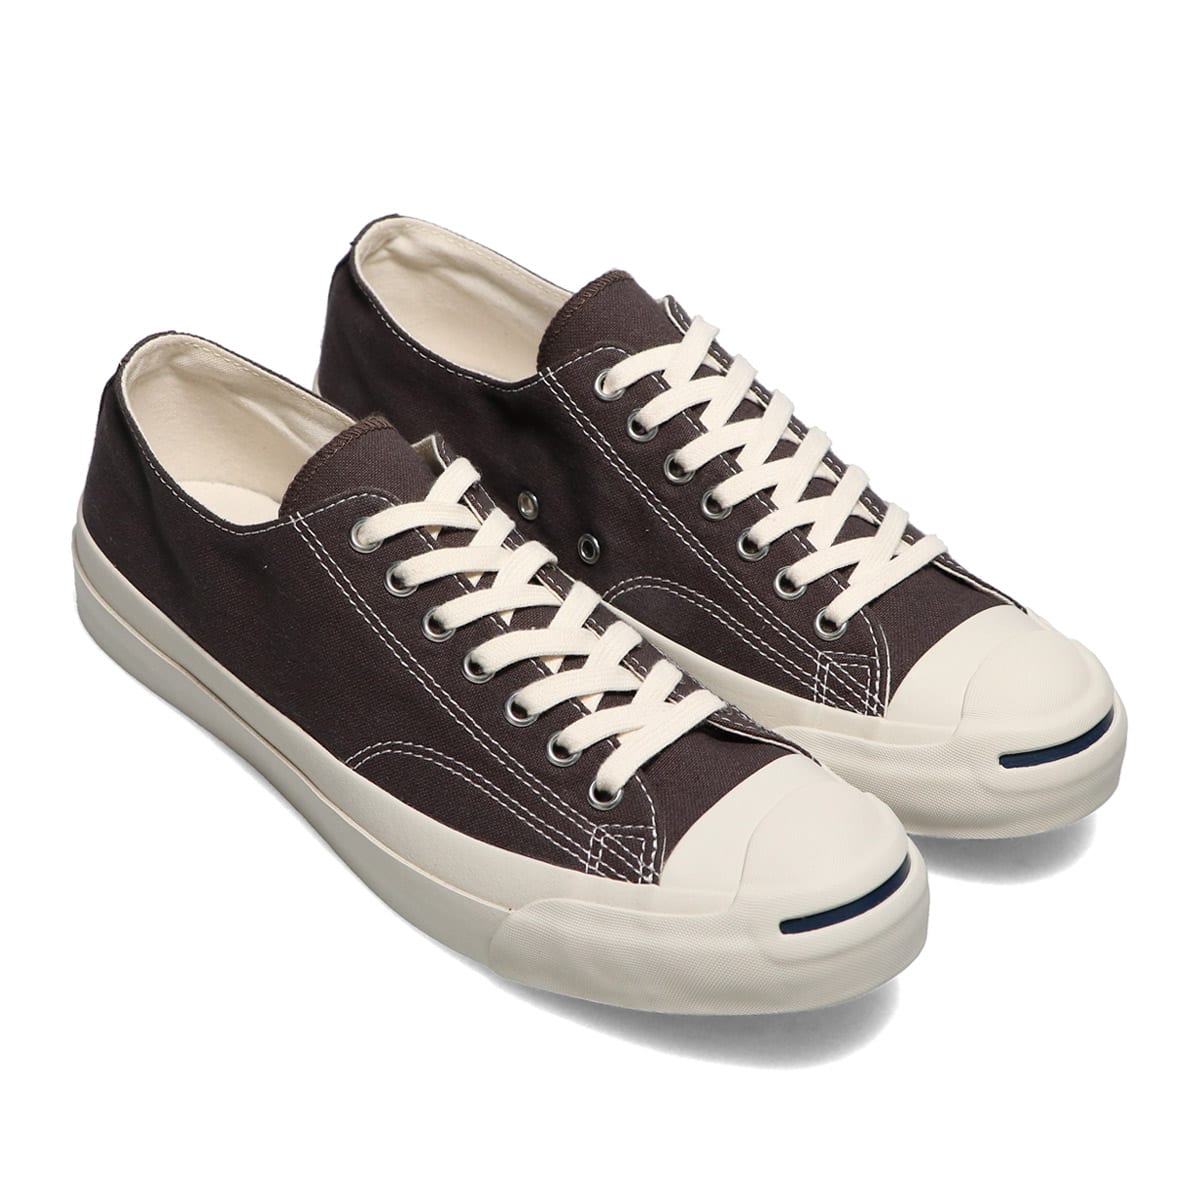 CONVERSE JACK PURCELL FOOD TEXTILE GREY 21FW-I